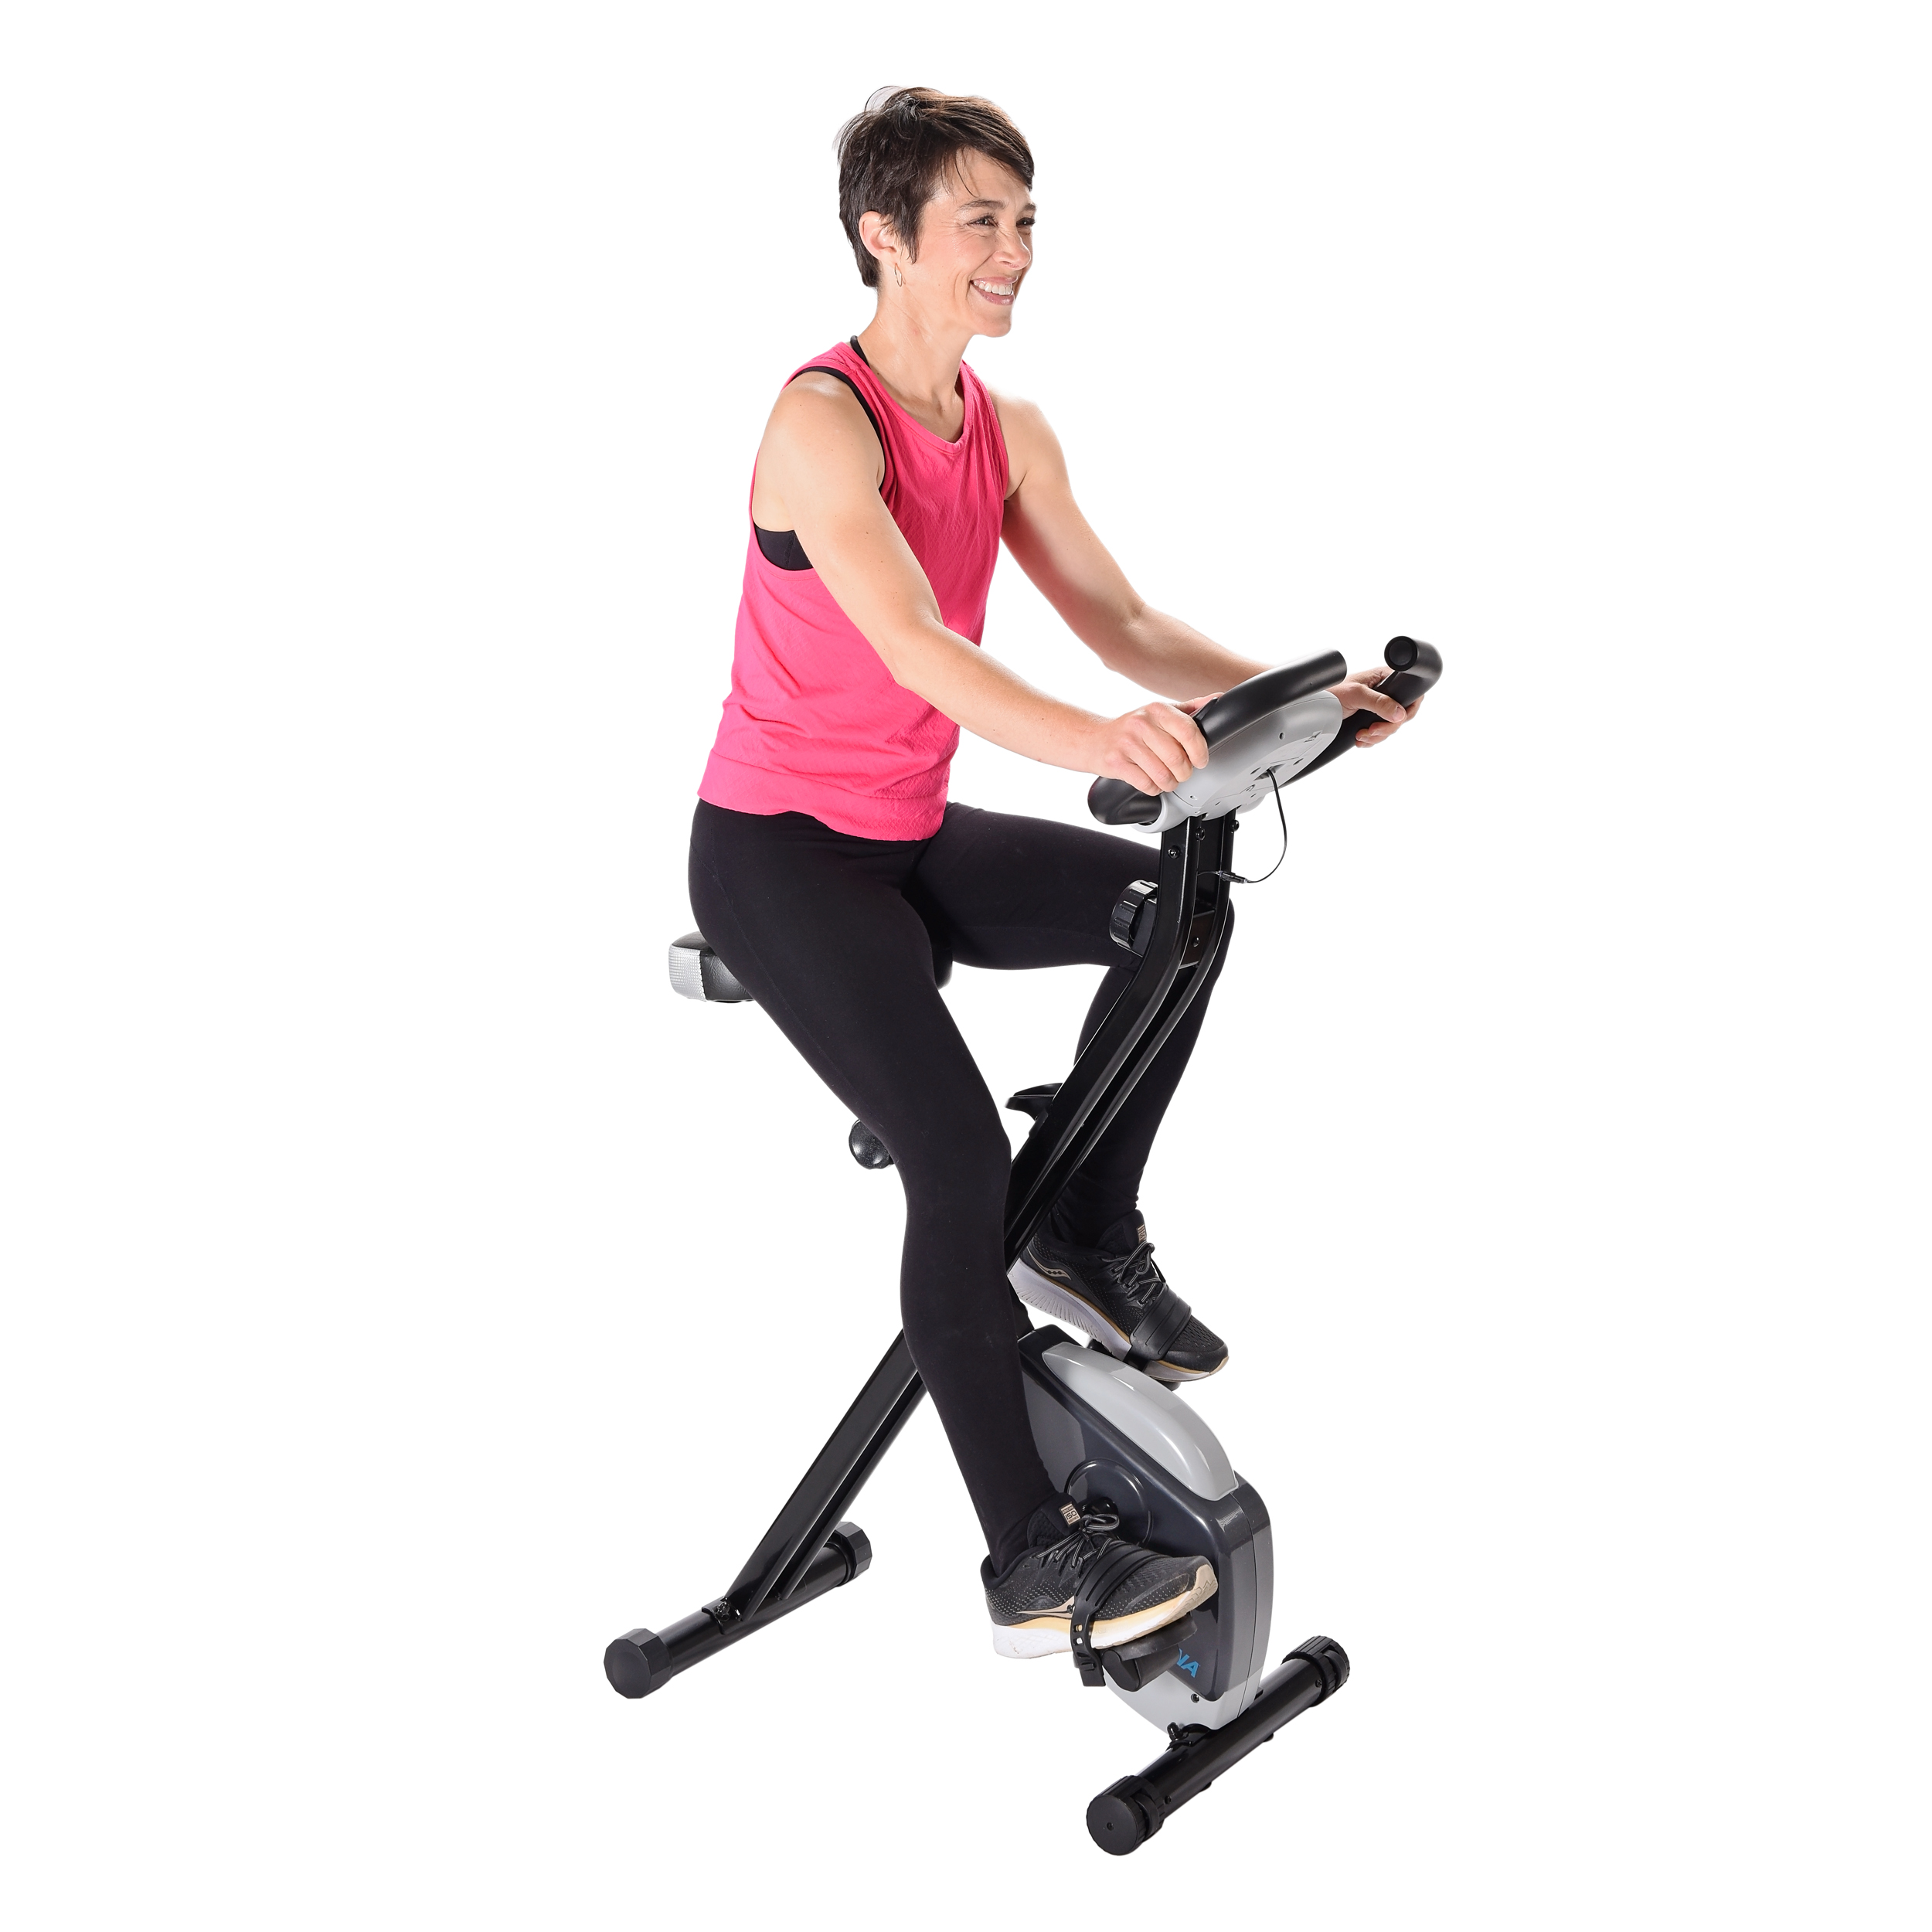 SWAOOS Folding electromagnetic exercise bike home exercise trainers and stationary vertical folding trainer,Black indoor fitness equipment